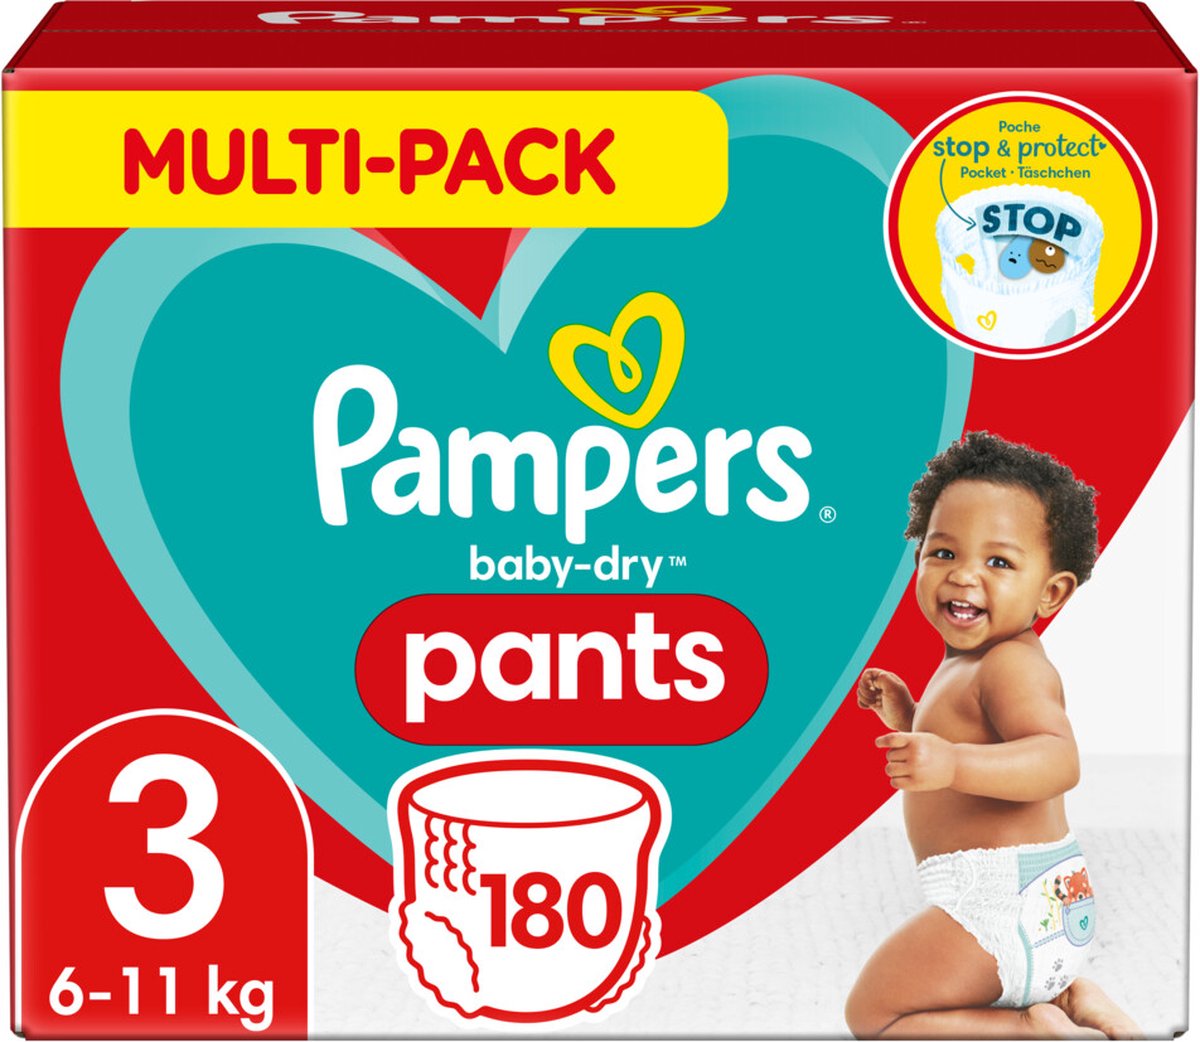 PAMPERS Baby-Dry Pants Taille 4 - 42 Couches-culottes